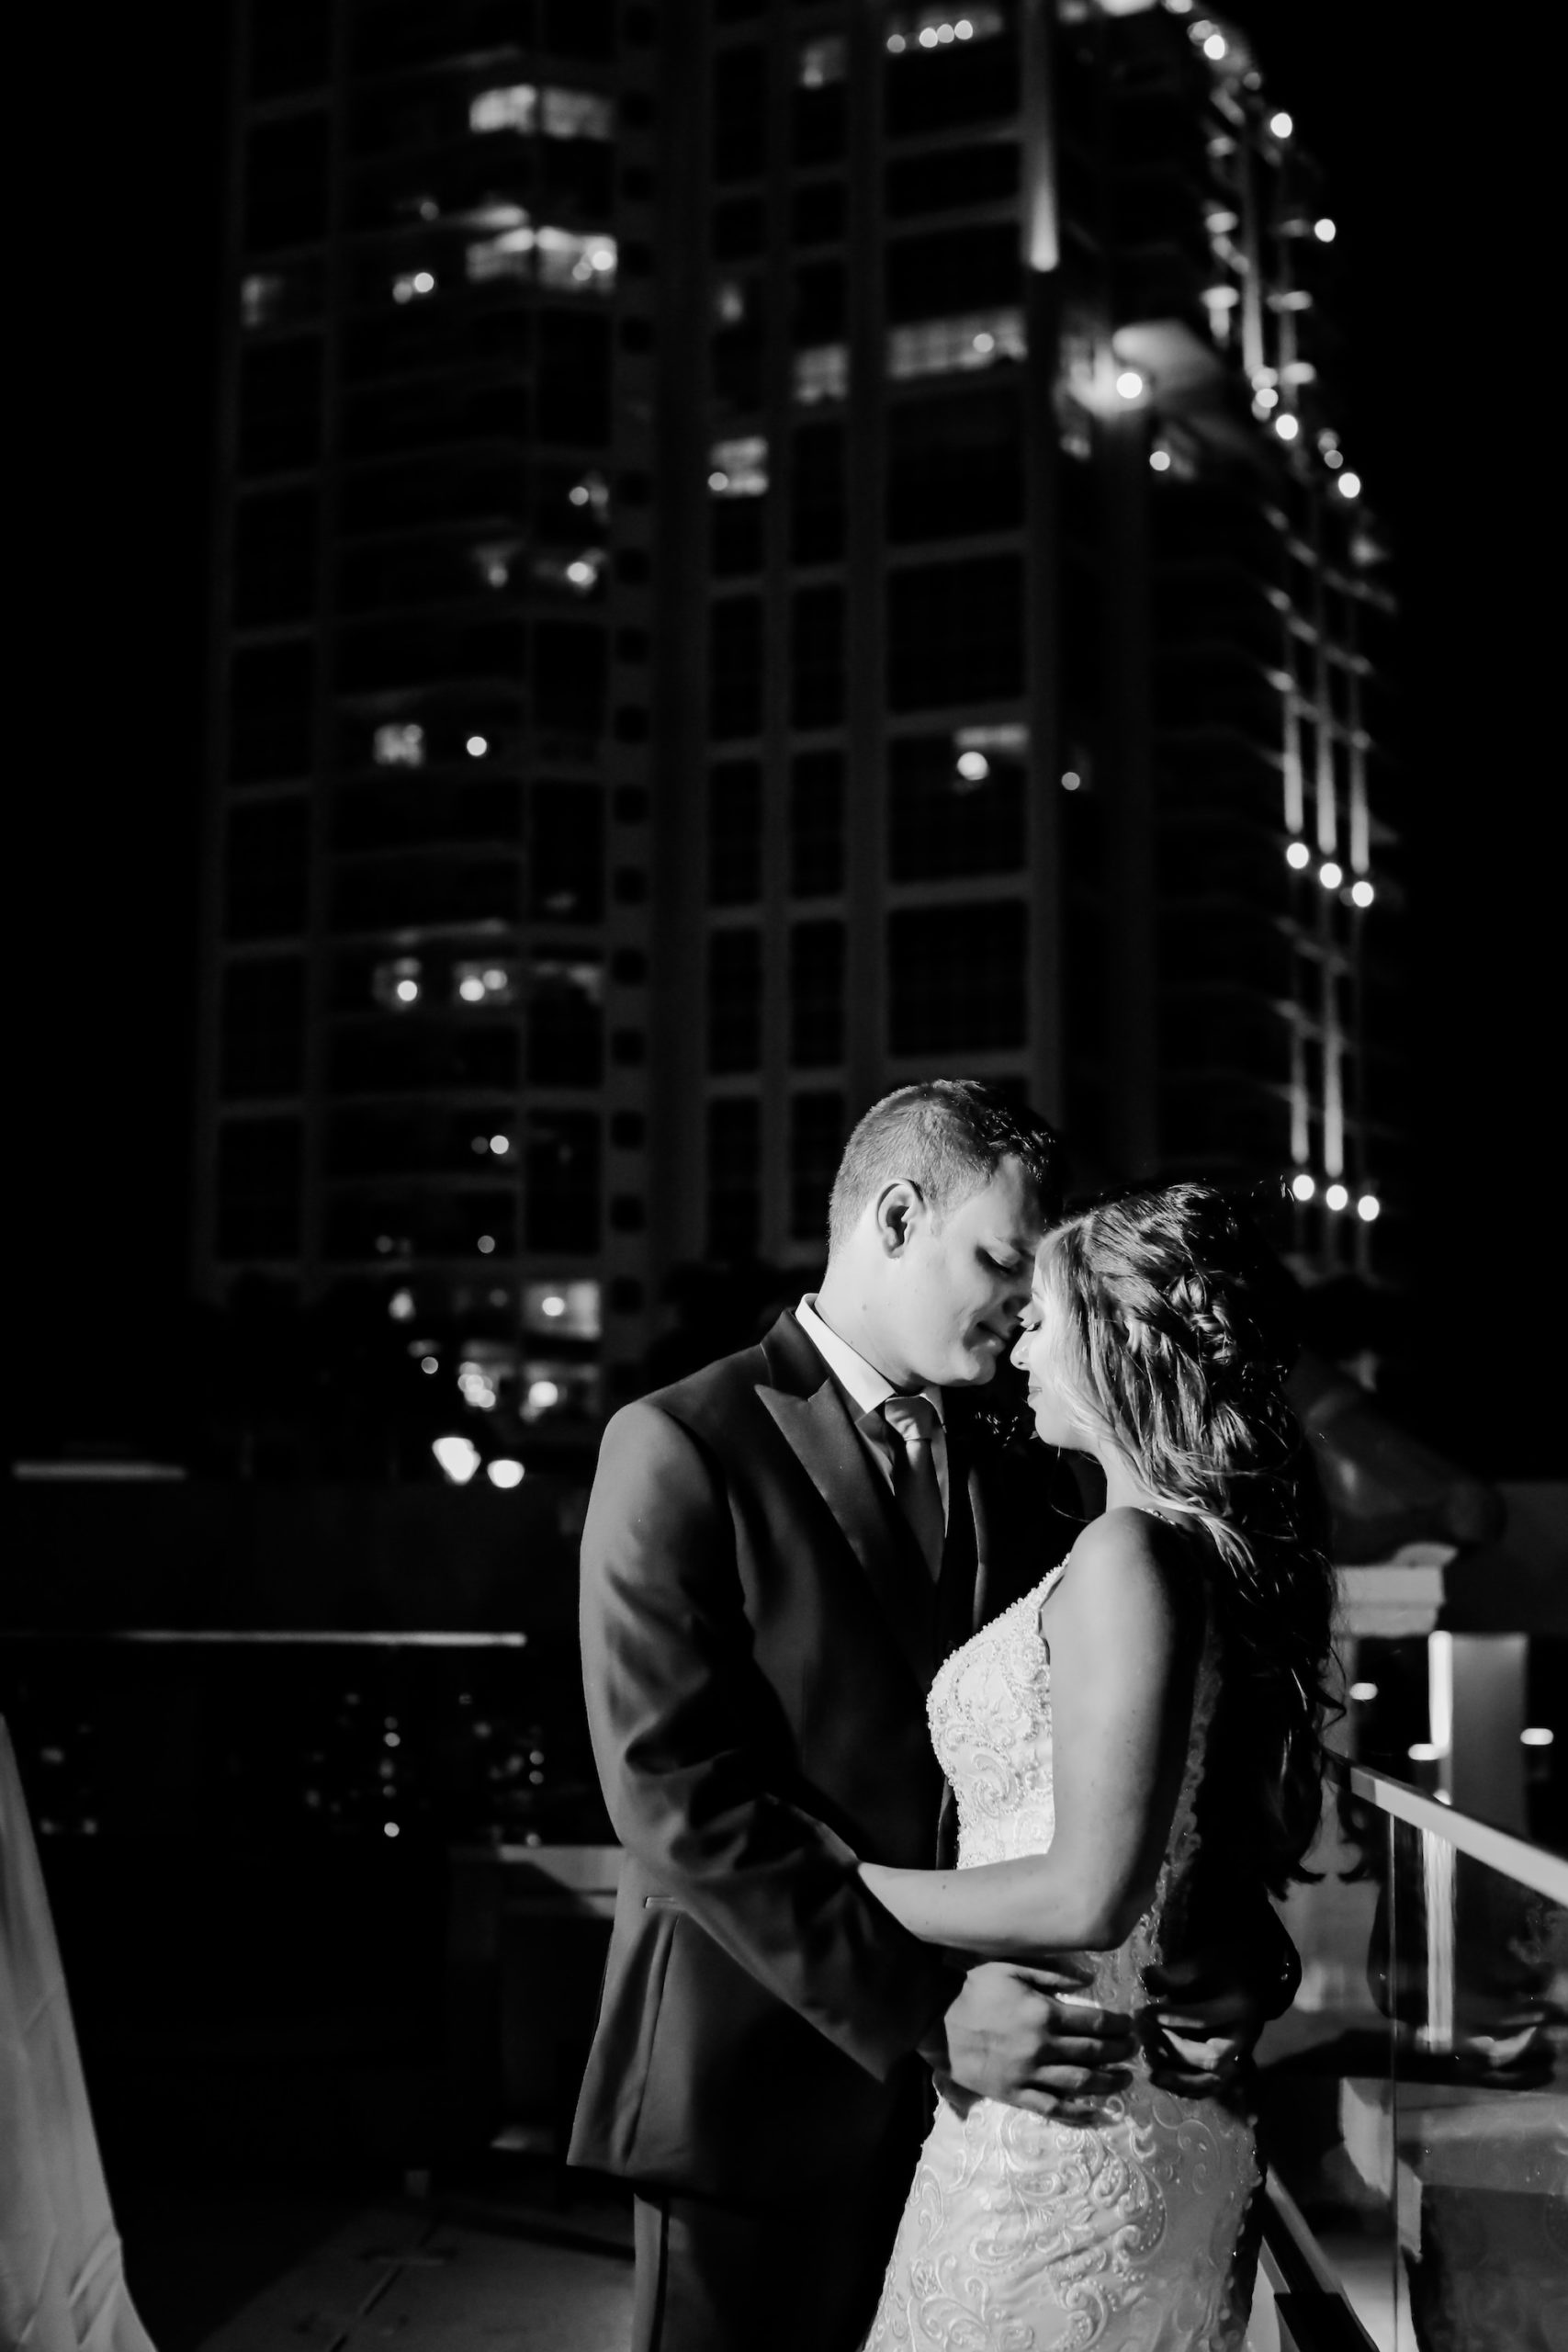 Florida Bride and Groom Black and White Wedding Portrait on Rooftop in Downtown St. Pete | Tampa Bay Boutique Hotel Wedding Venue The Birchwood | Florida Wedding Photographer Lifelong Photography Studio